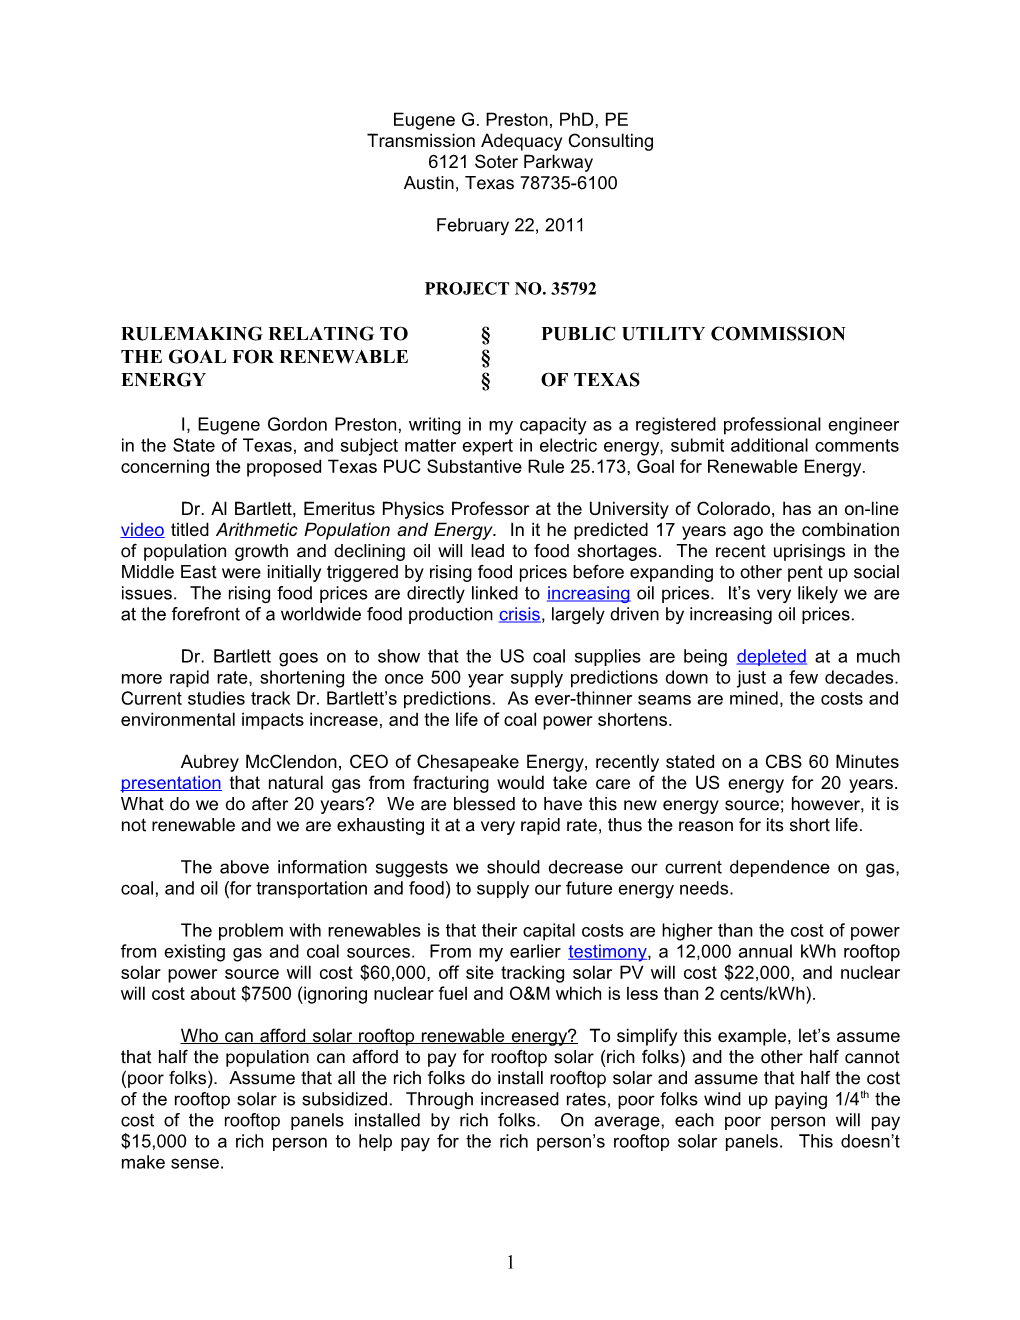 Rulemaking Relating to Public Utility Commission